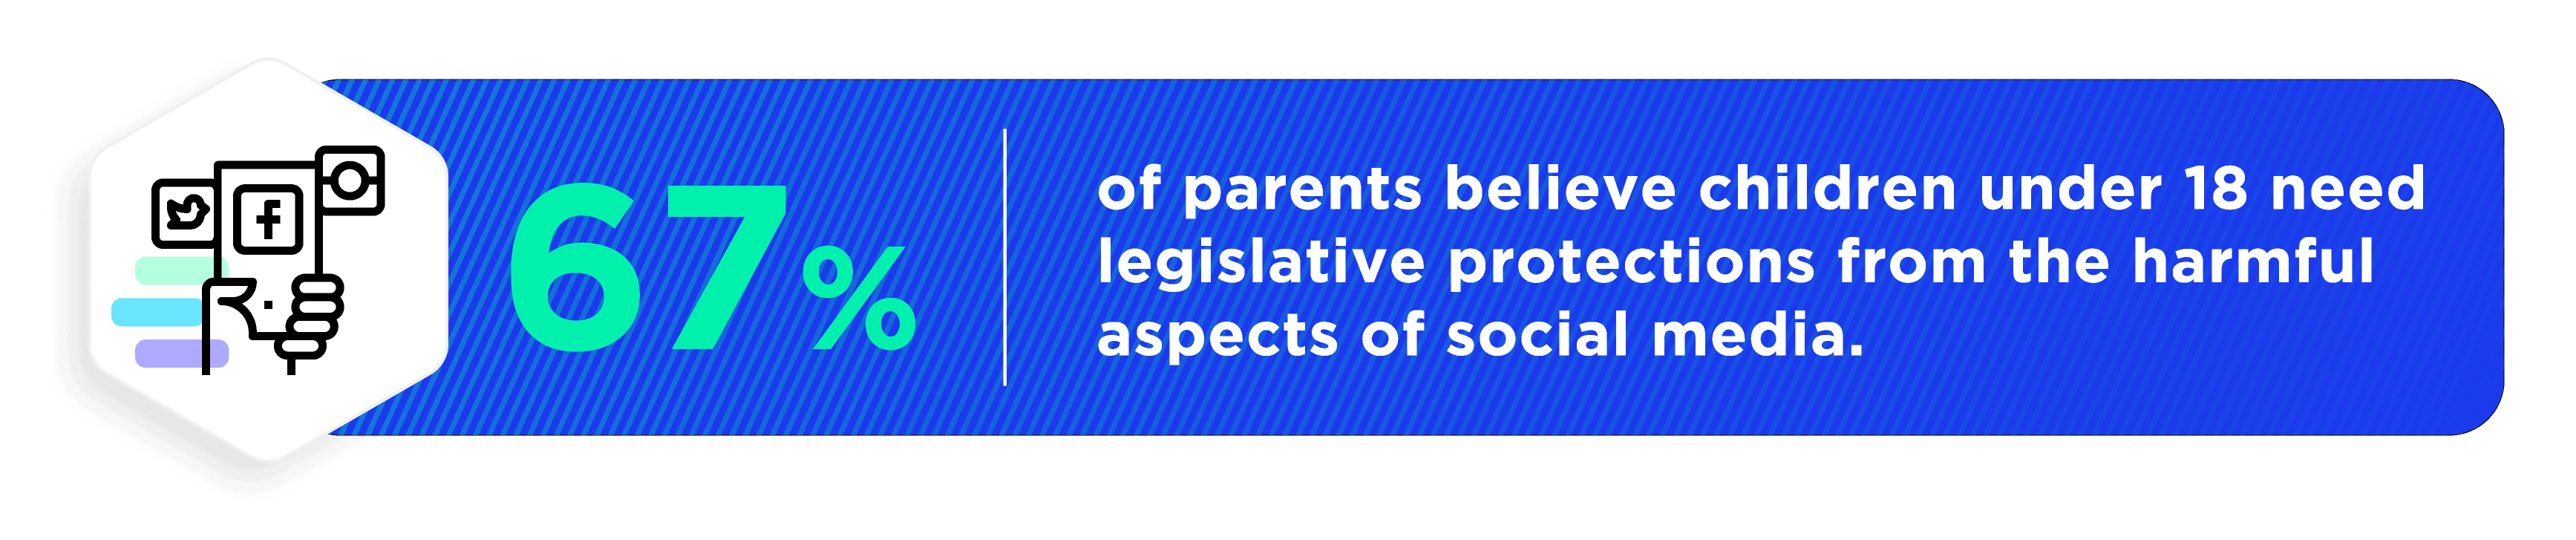 67% of parents believe children under 18 need legislative protections form the harmful aspects of social media.